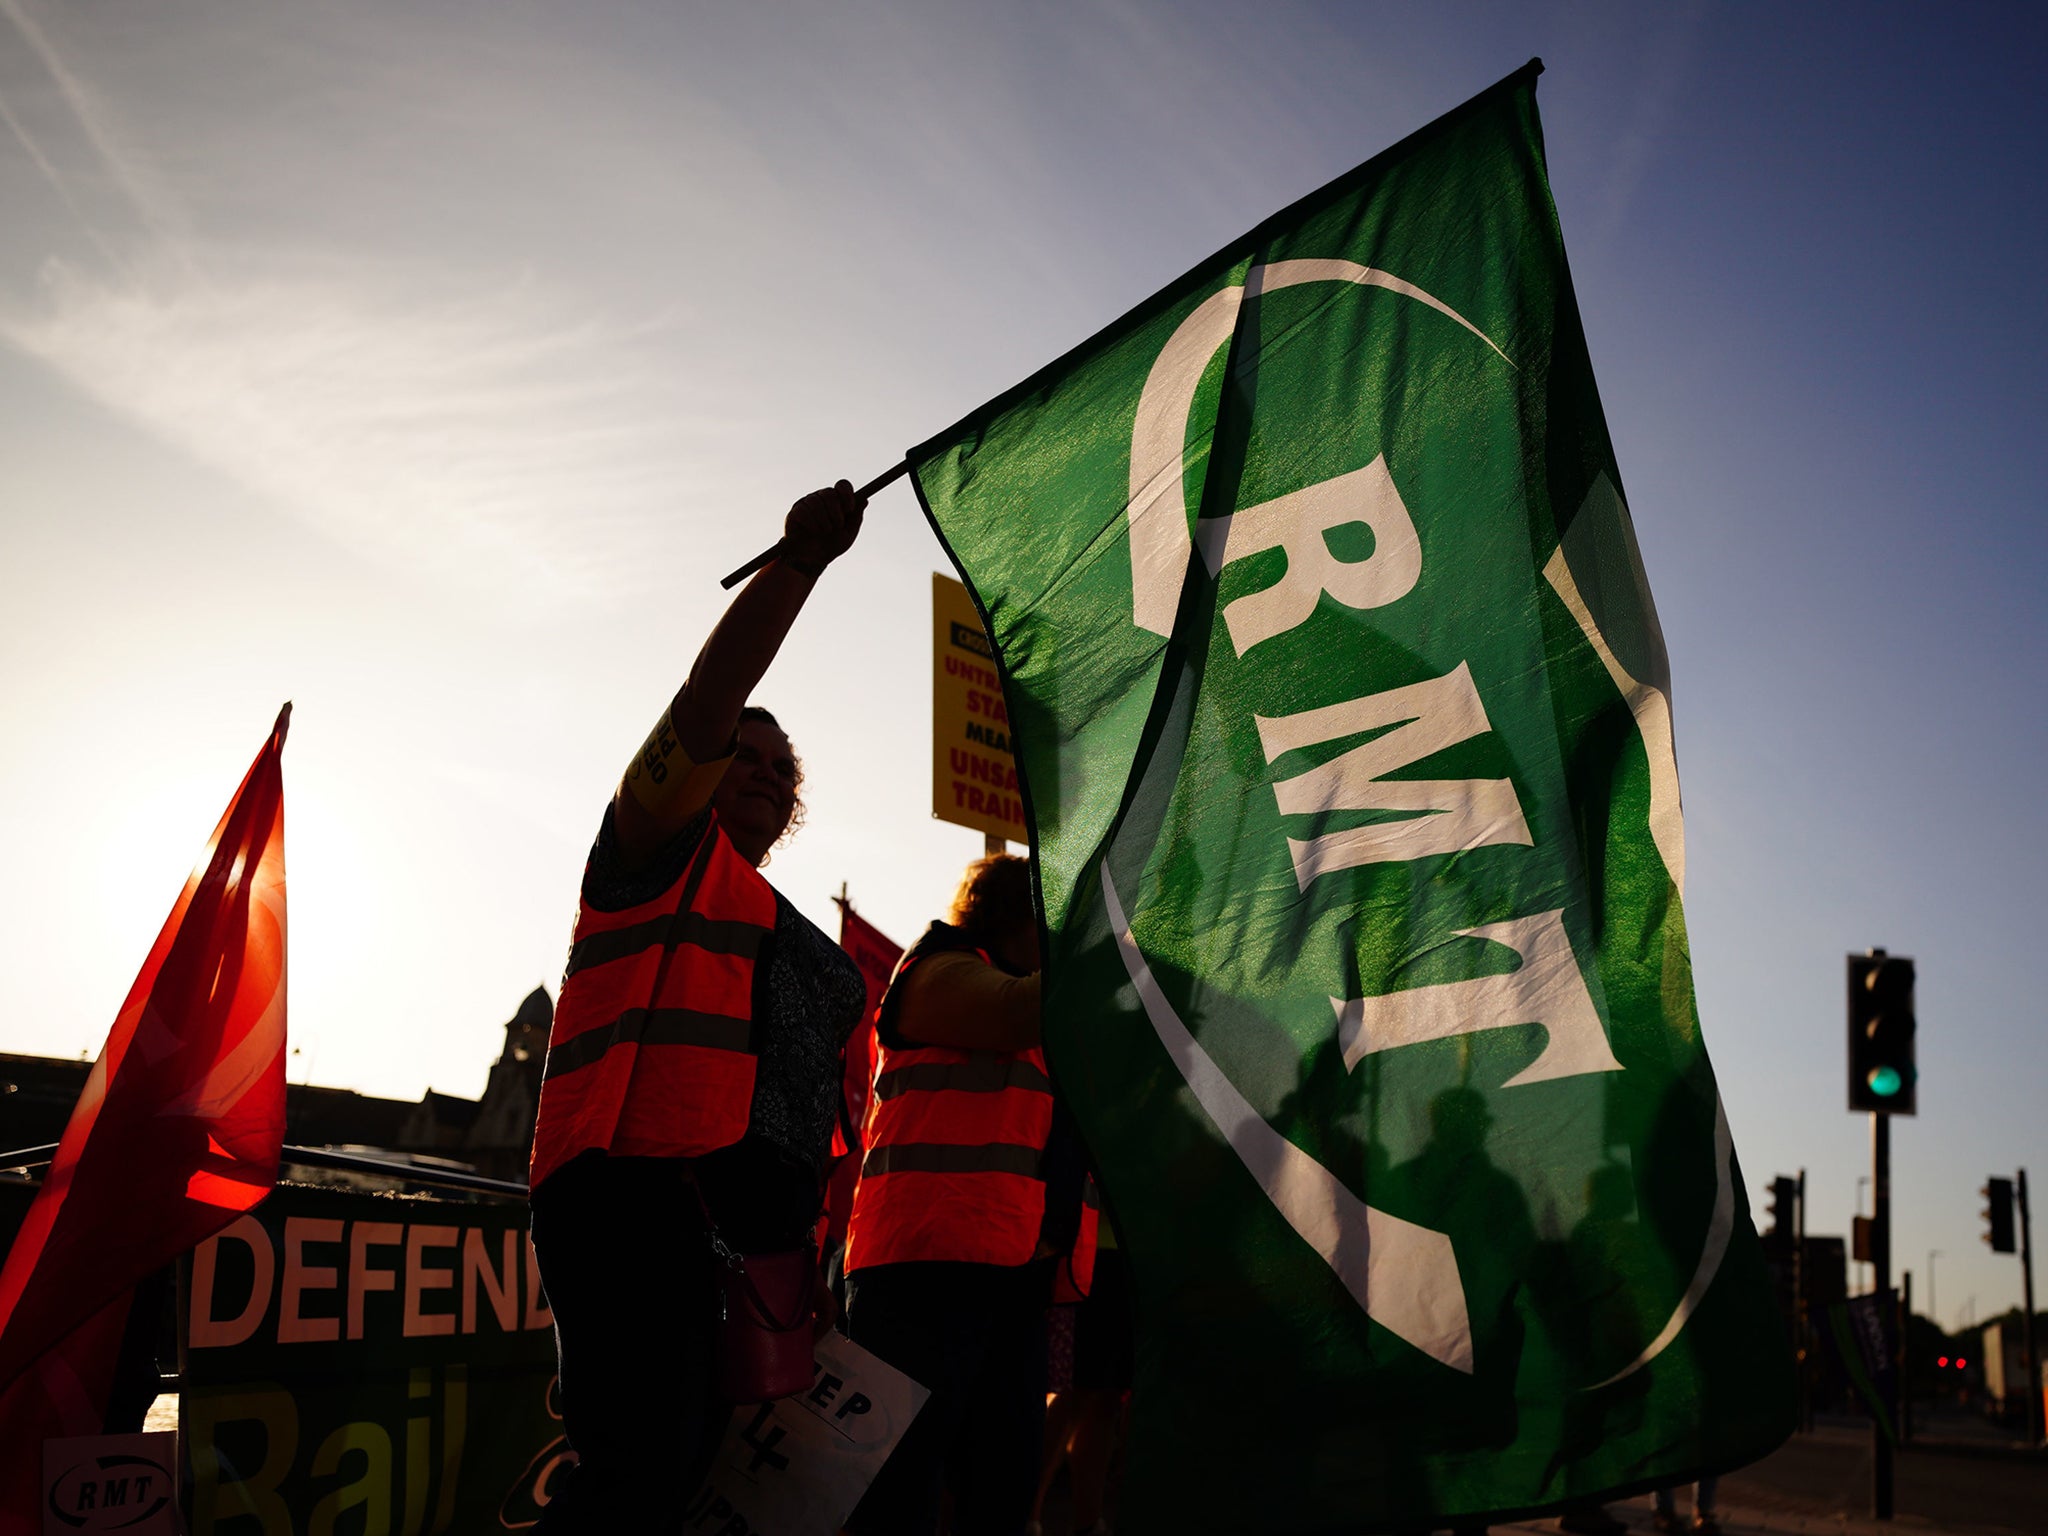 The National Union of Rail, Maritime and Transport Workers (RMT)